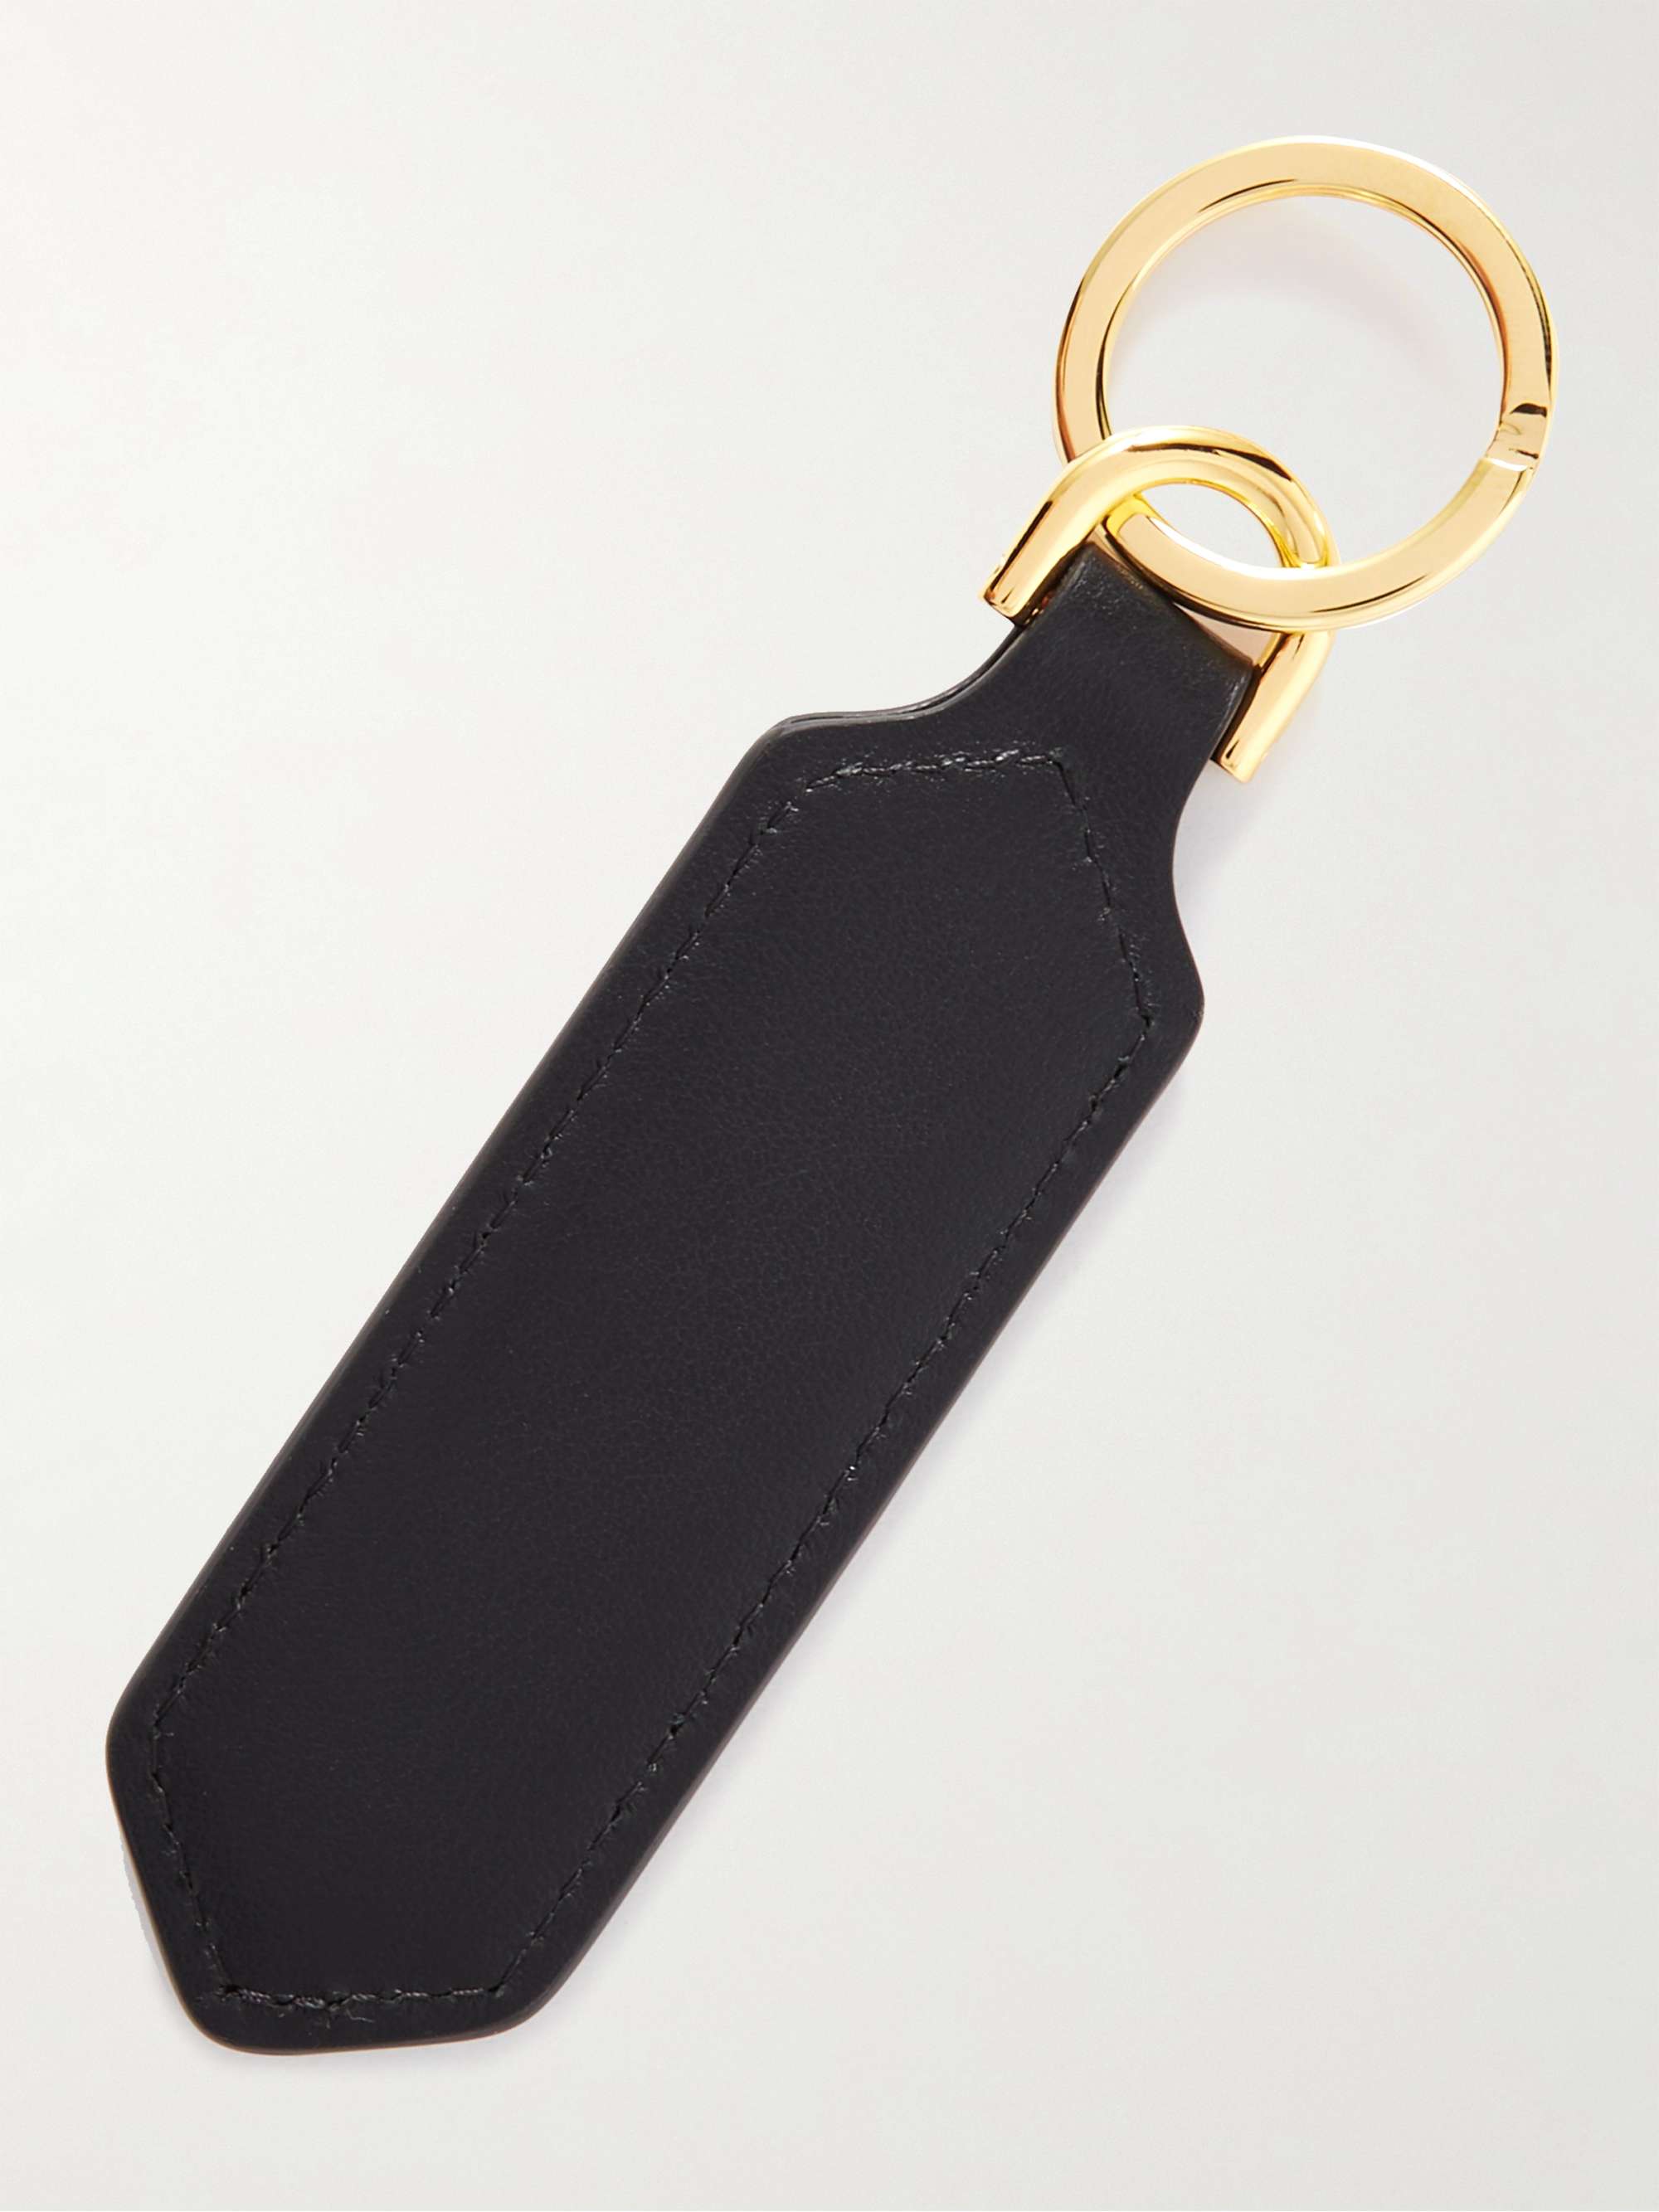 TOM FORD Logo-Debossed Leather and Gold-Tone Key Fob